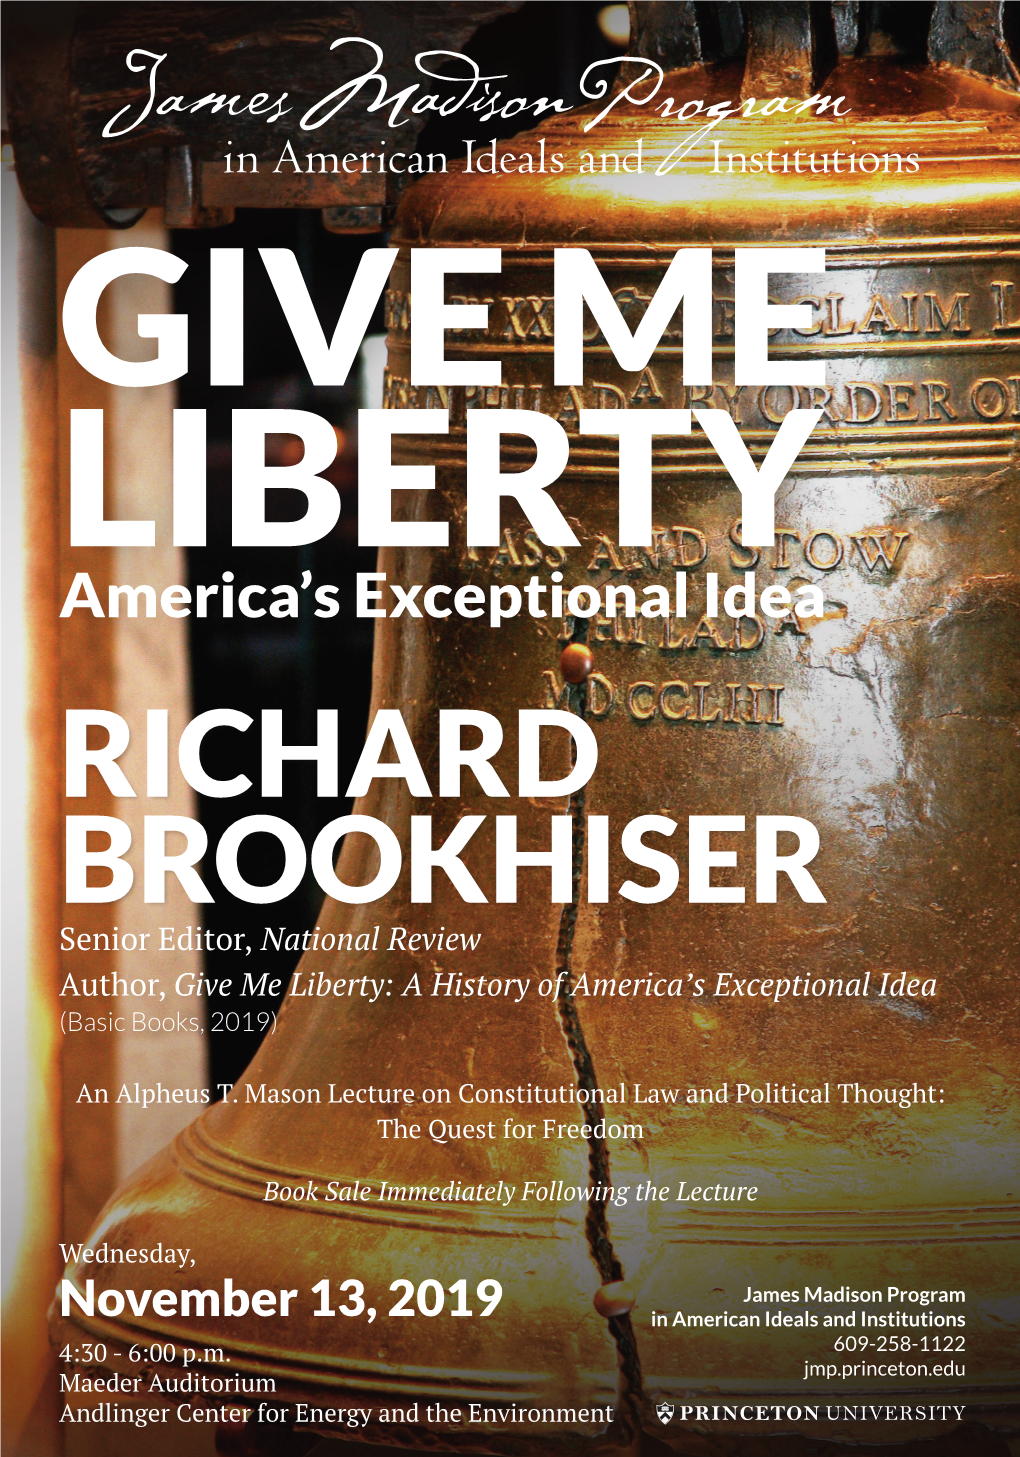 RICHARD BROOKHISER Senior Editor, National Review Author, Give Me Liberty: a History of America’S Exceptional Idea (Basic Books, 2019)